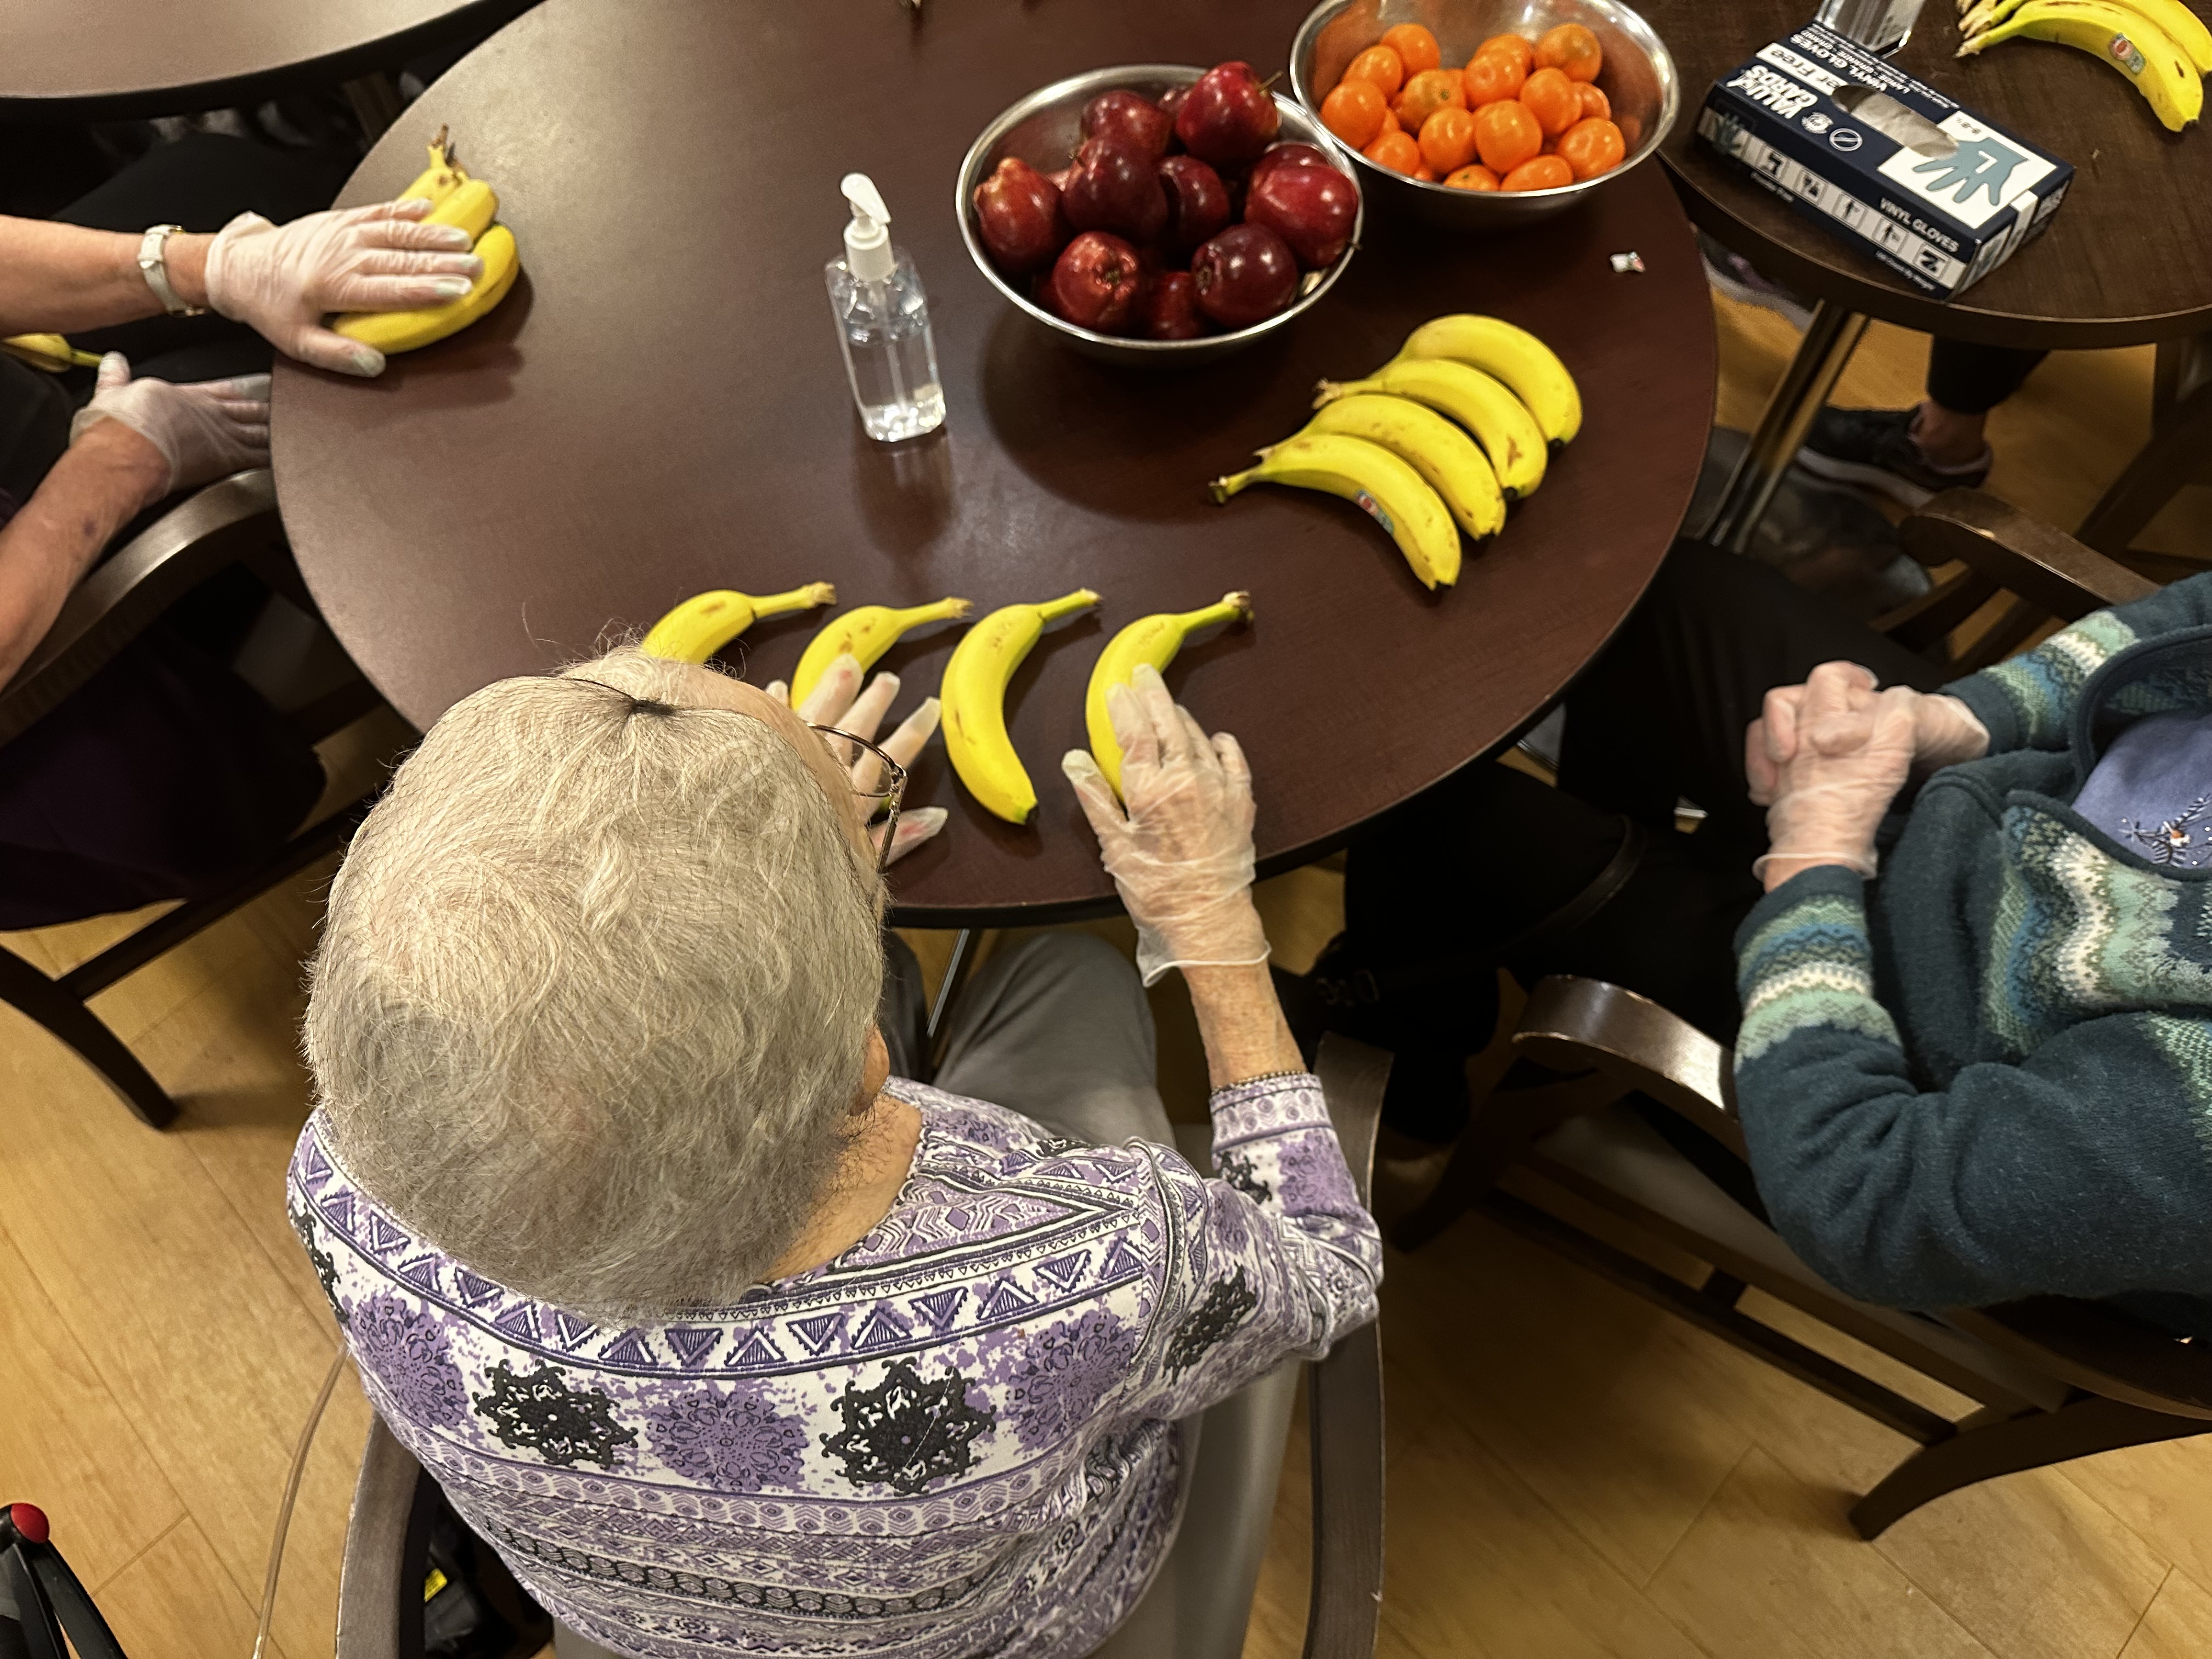 An aerial image looks down on three seniors arranging fruit on a brown round table.